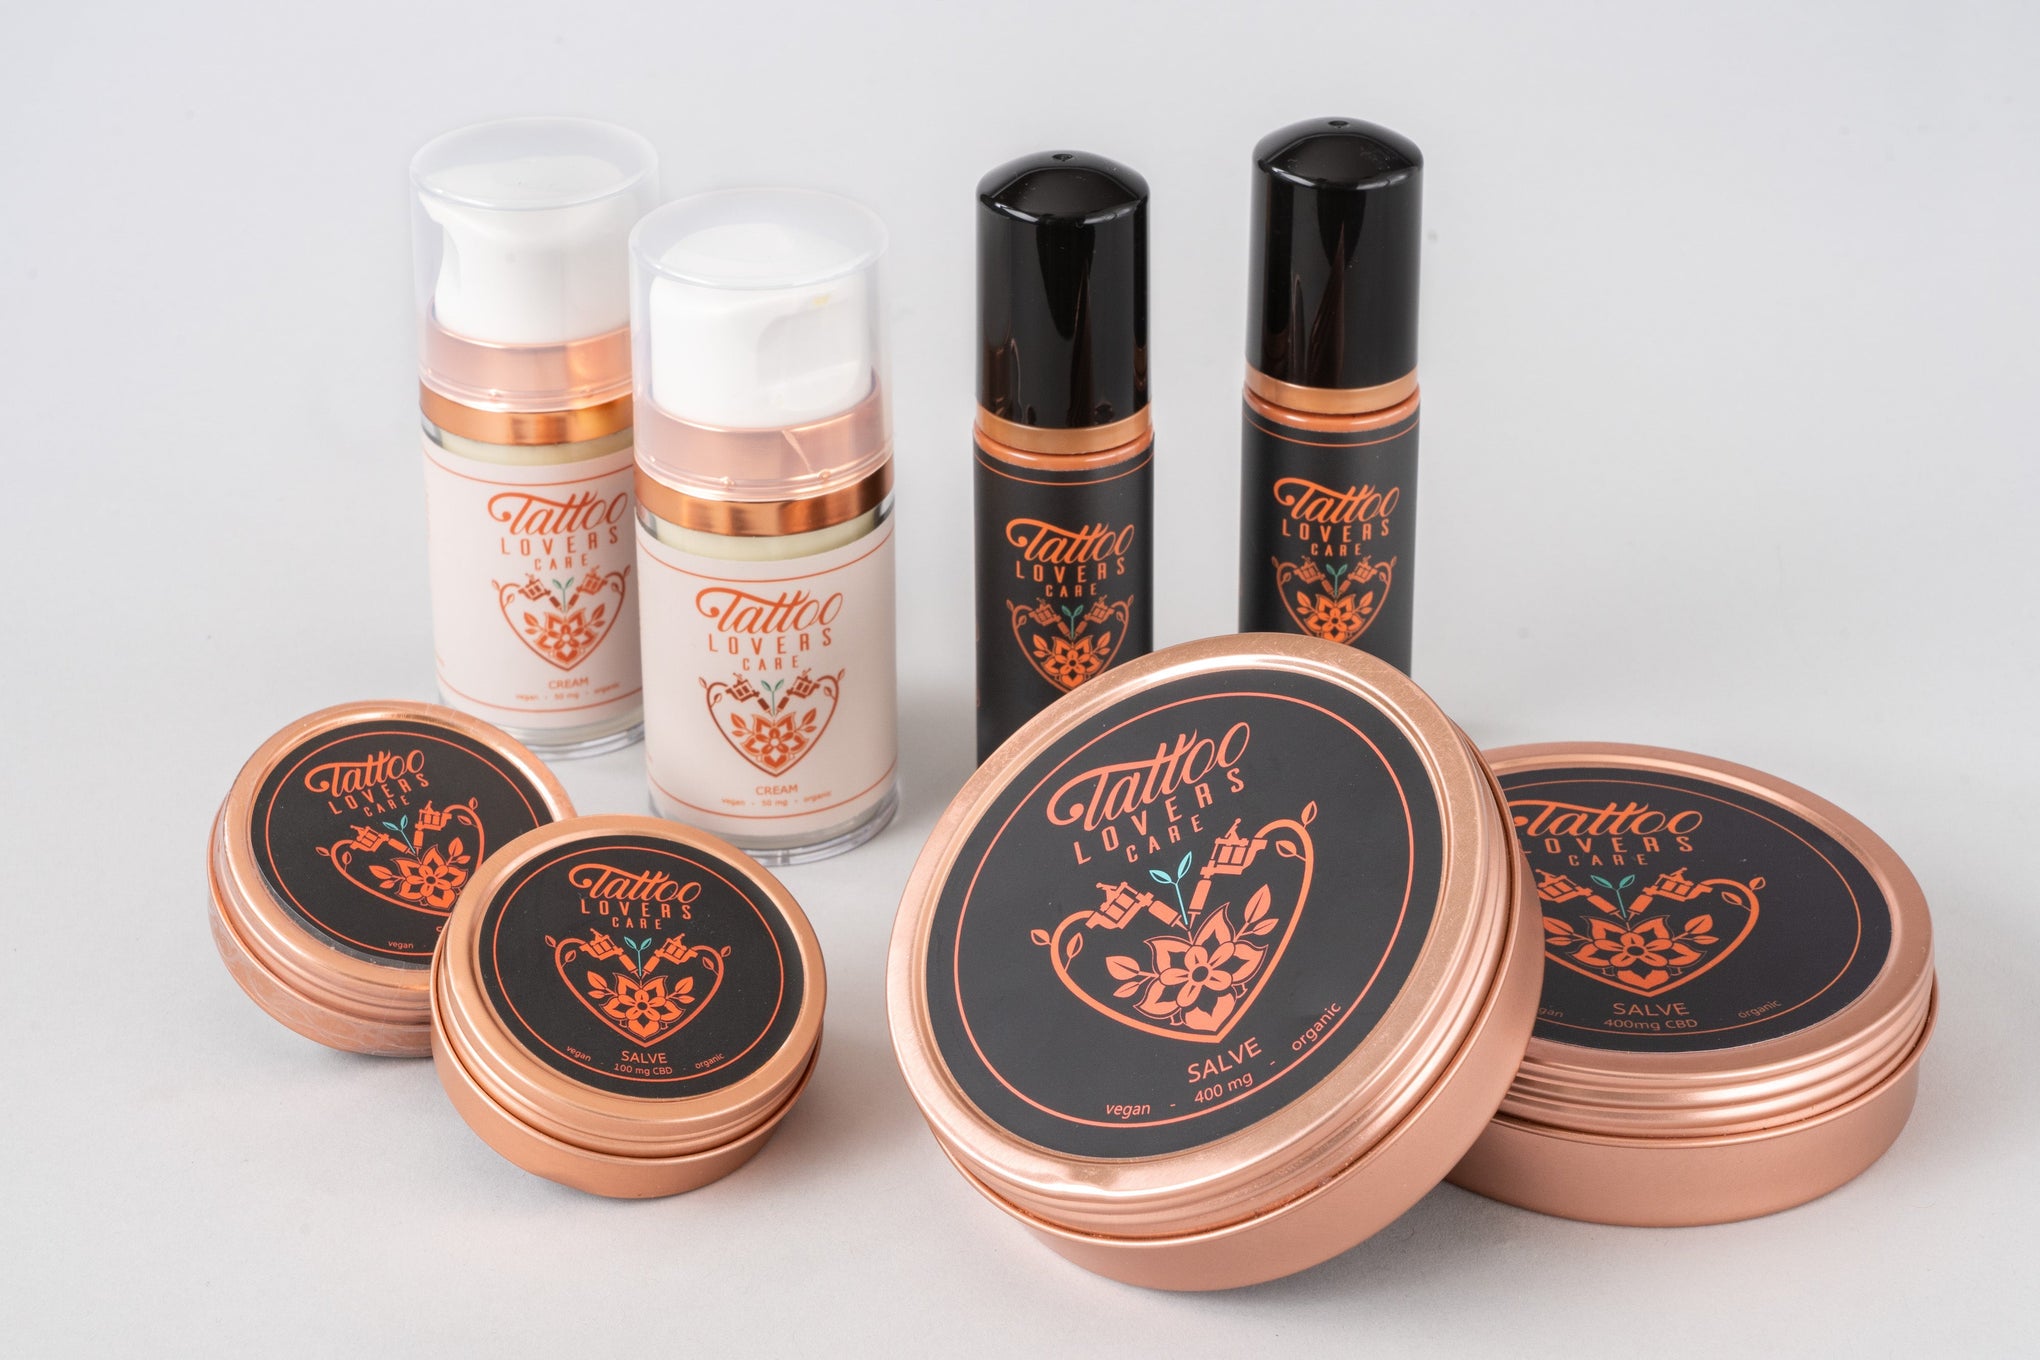 Loyalty Program - 3 Cases - Lovers Trio (Soap, Salve, and Cream)